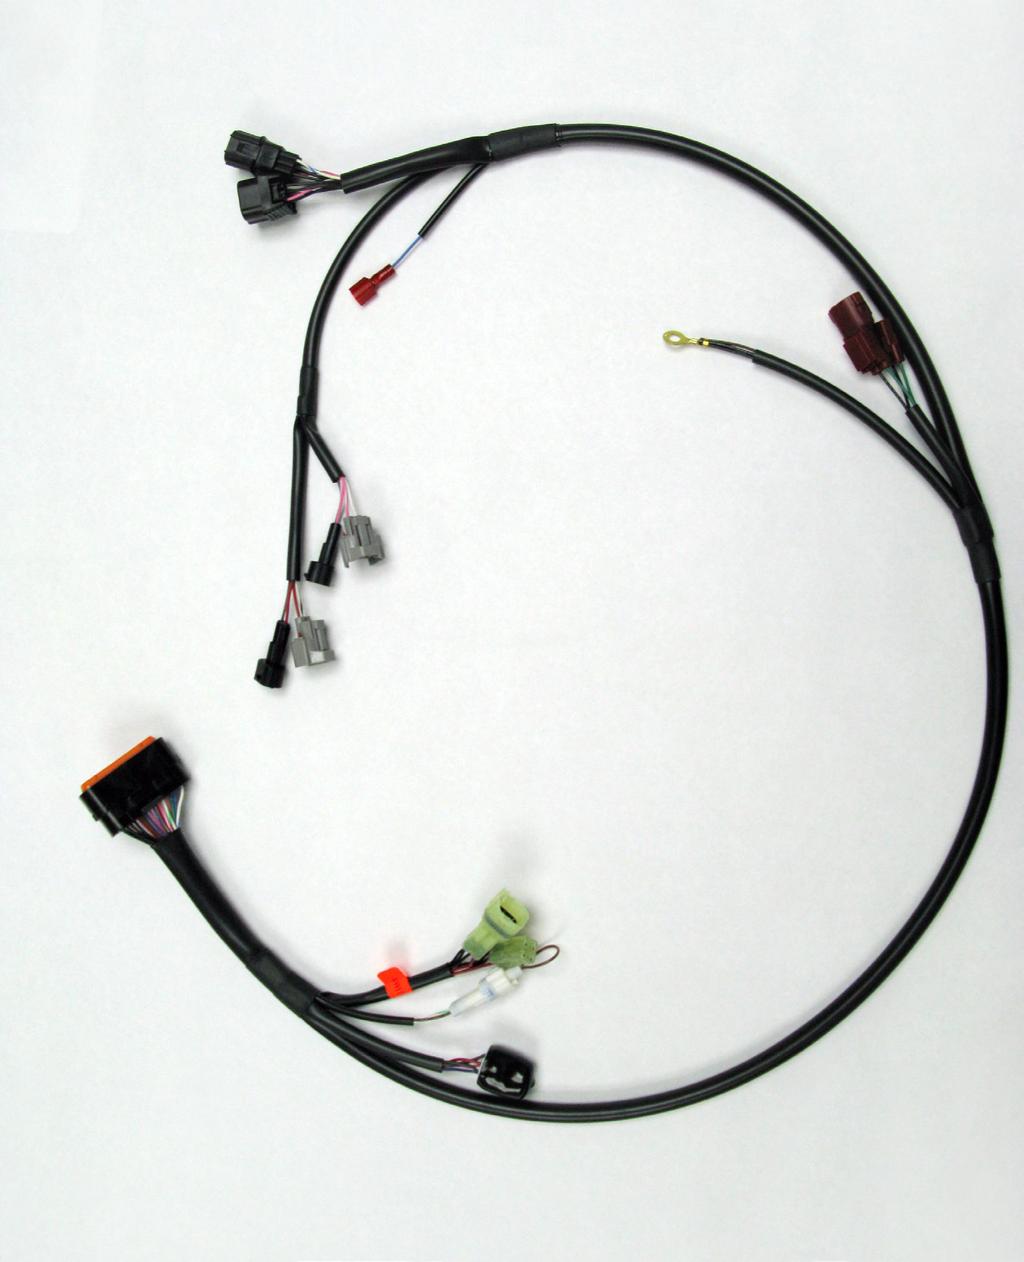 2>IDENTIFY INCLUDED PARTS 1. Z-Fi TC control unit 2. Fuel harness 3. Coil harness 4. Shift Switch and mounting hardware 5.